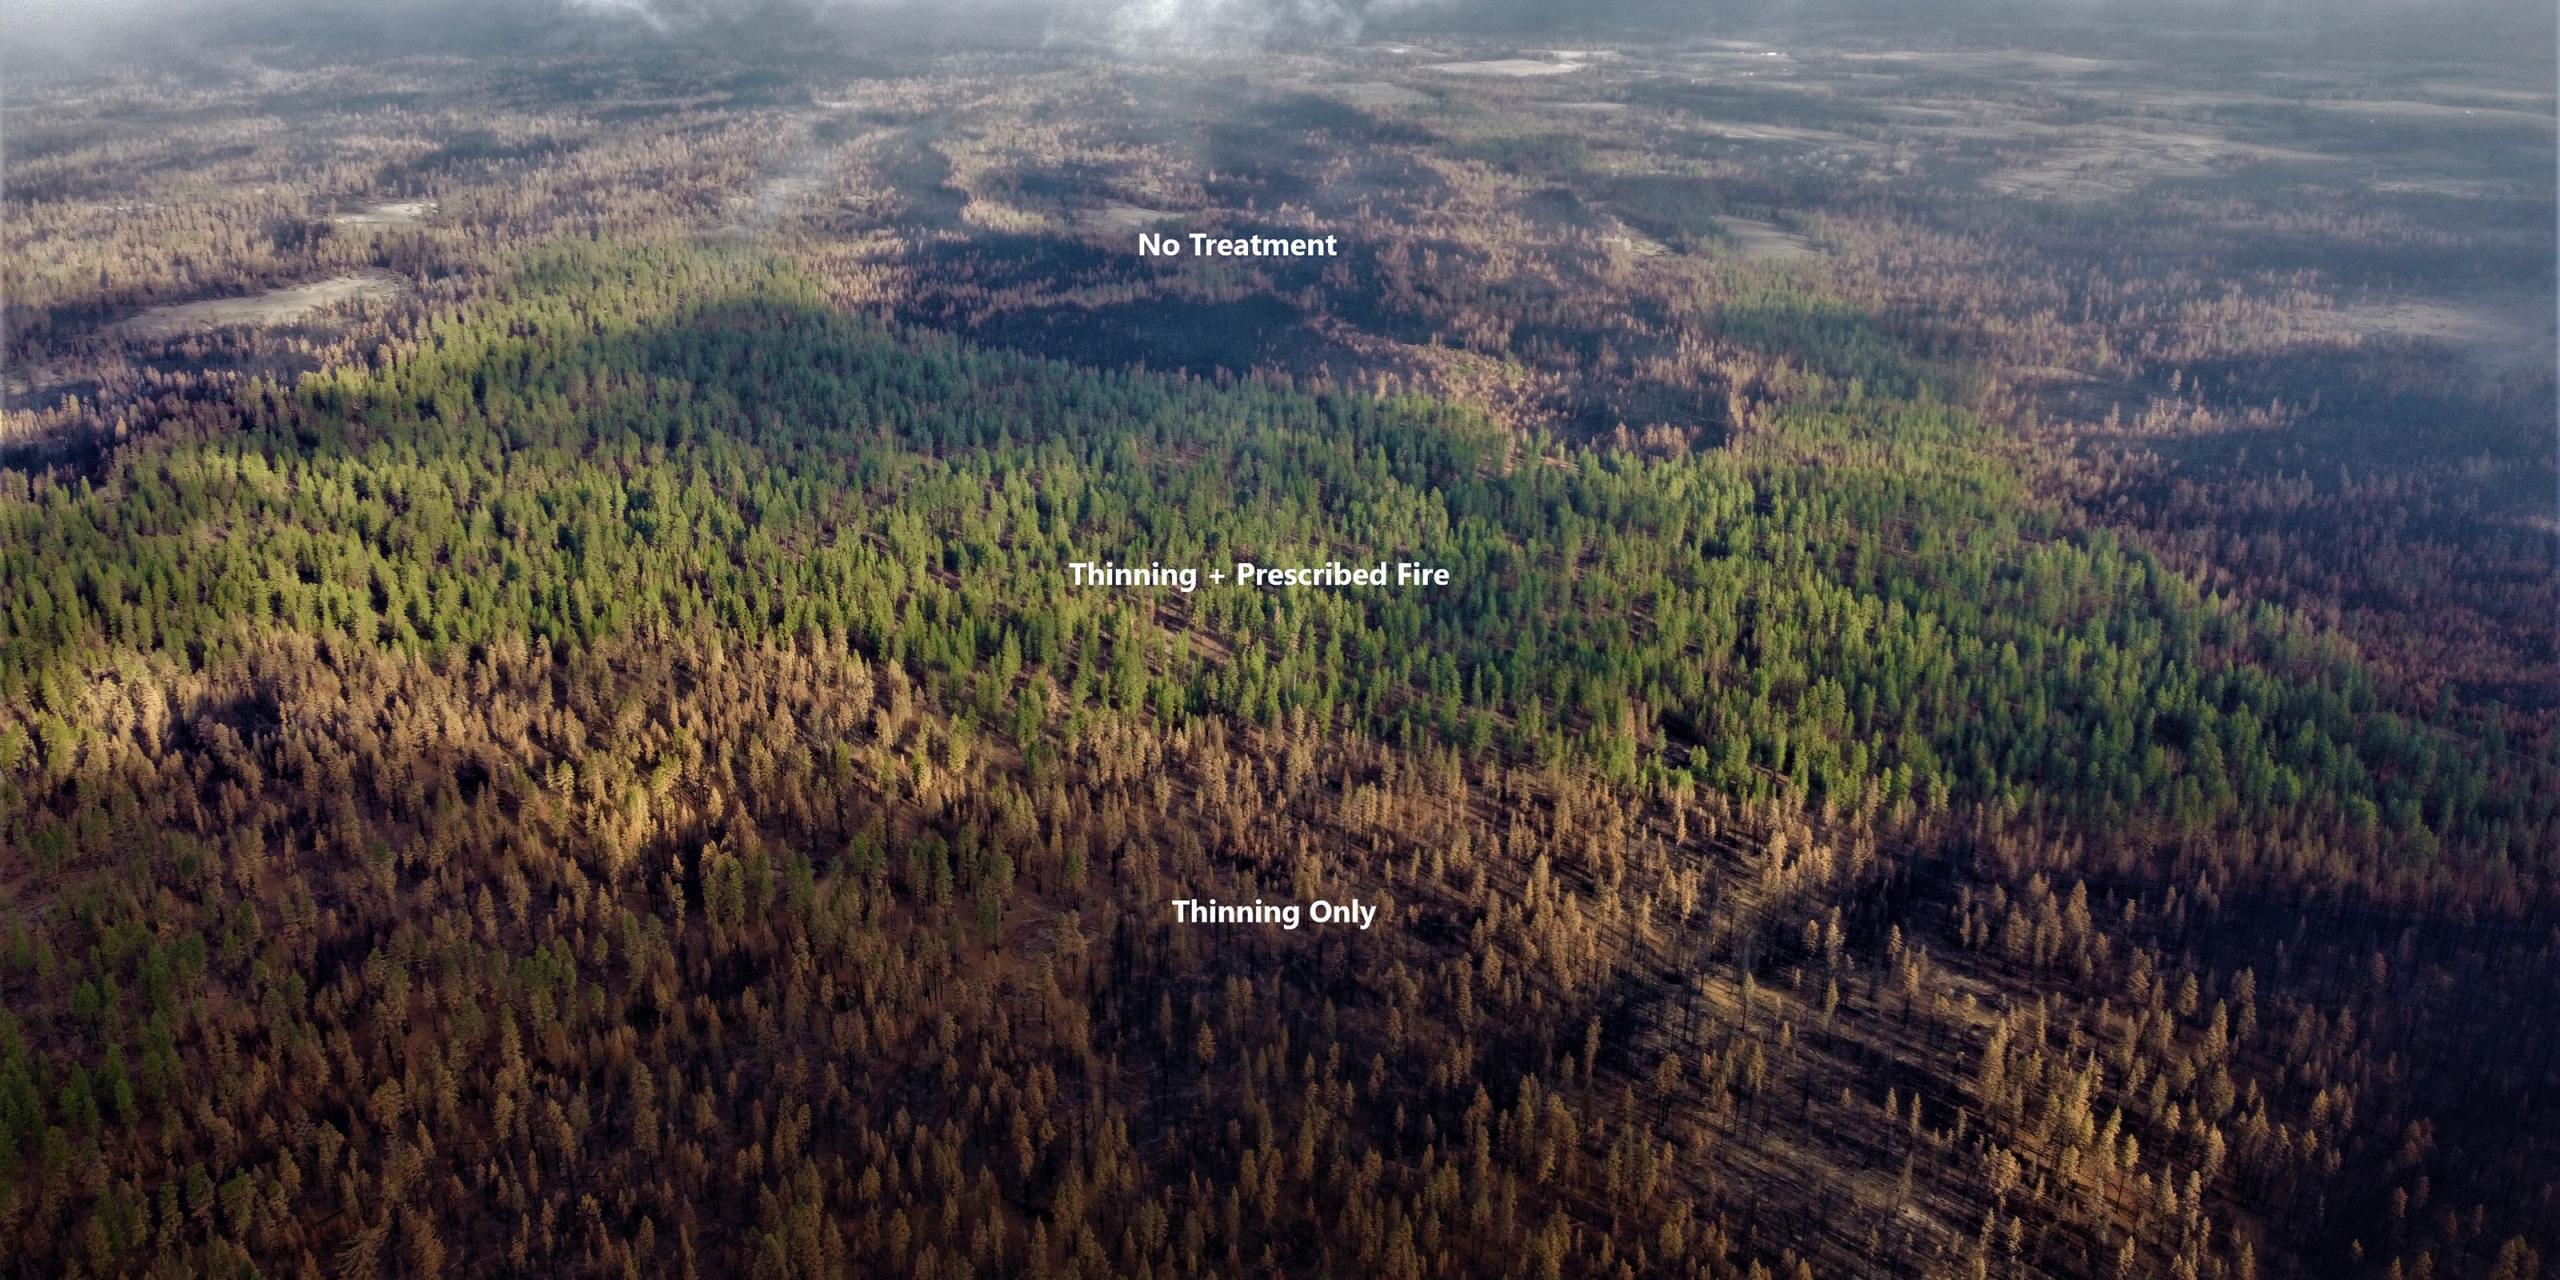 A photo of the forest burned by the Bootleg Fire